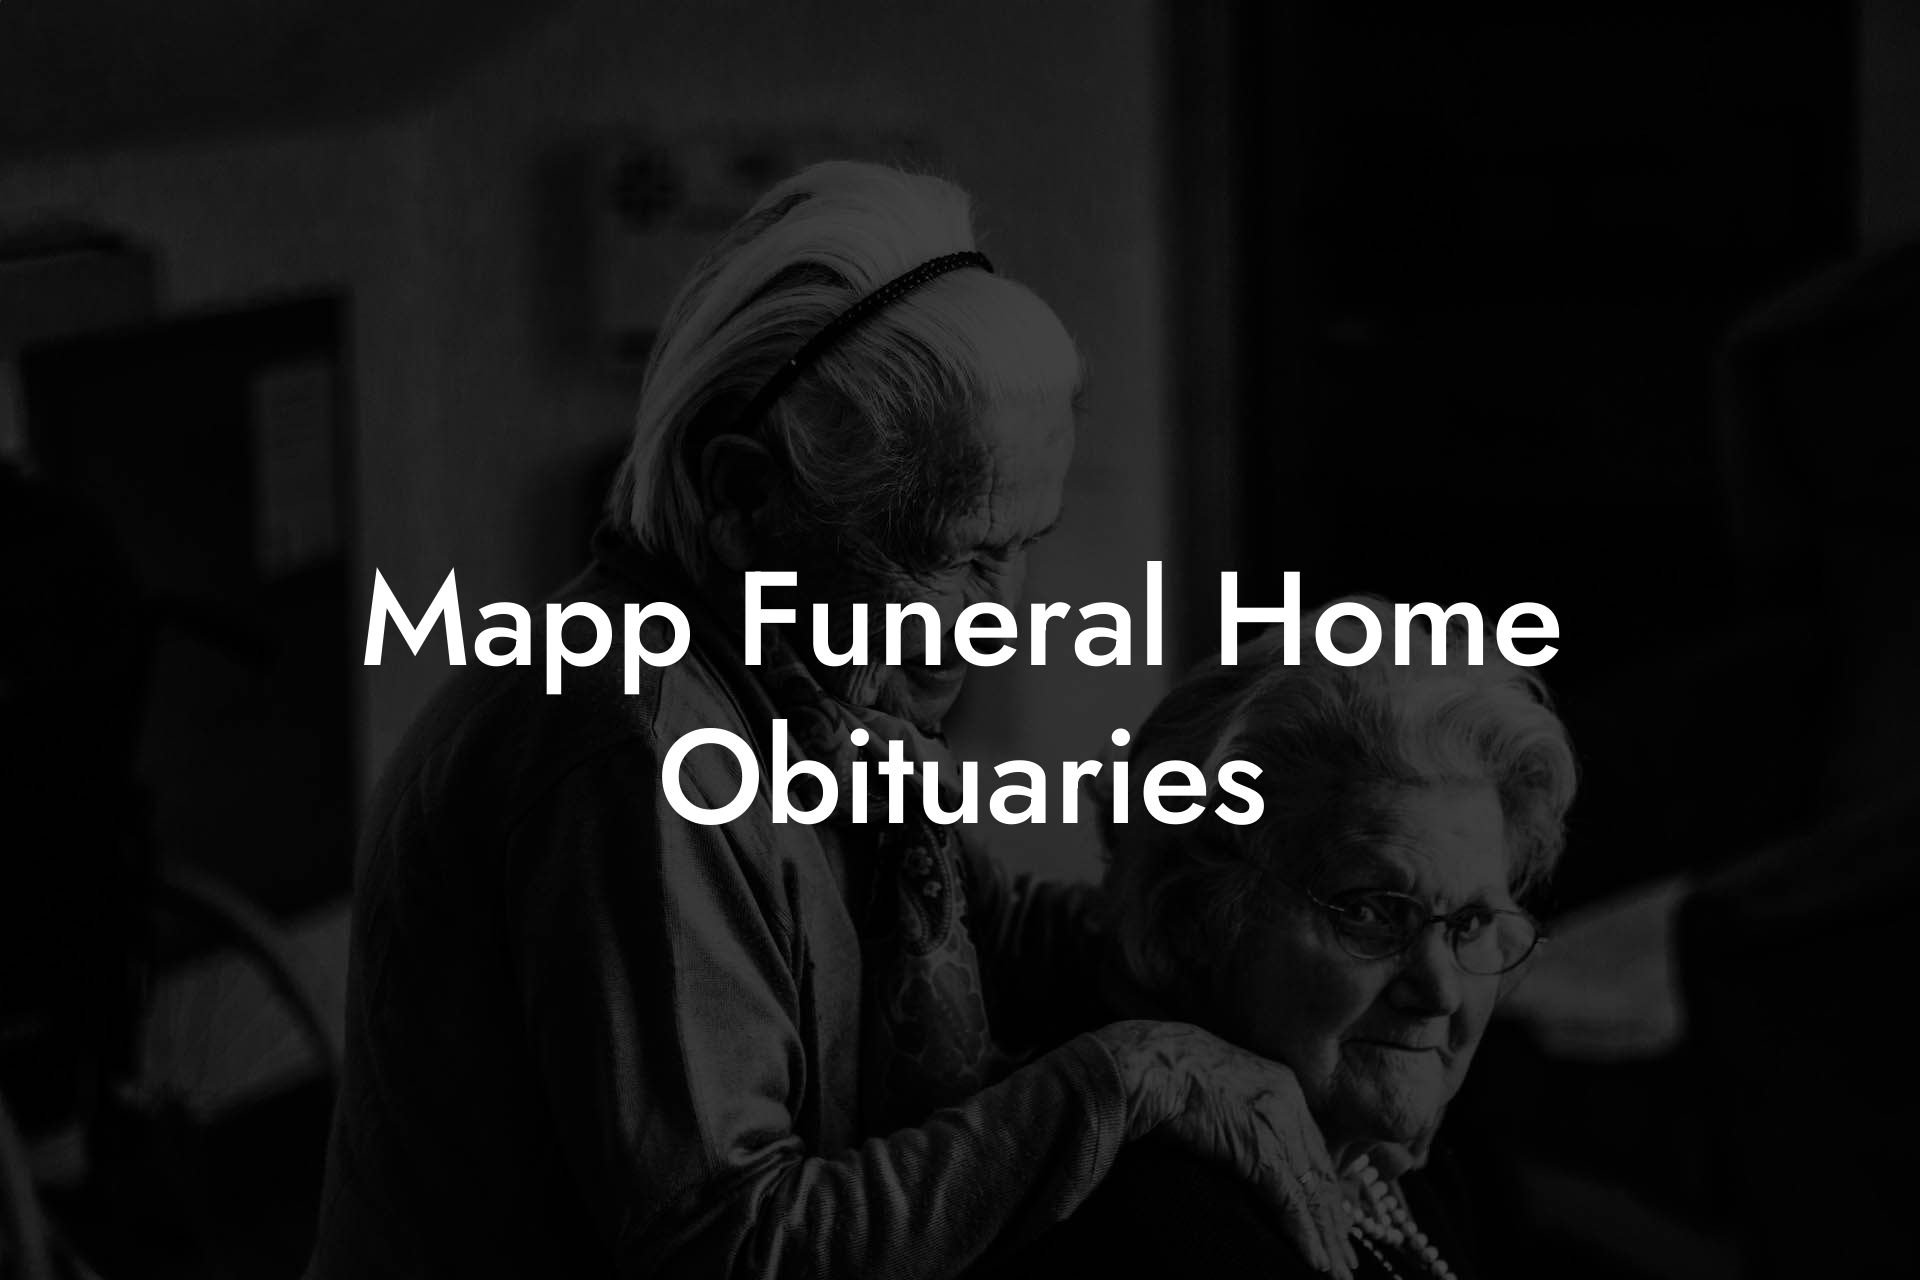 Mapp Funeral Home Obituaries